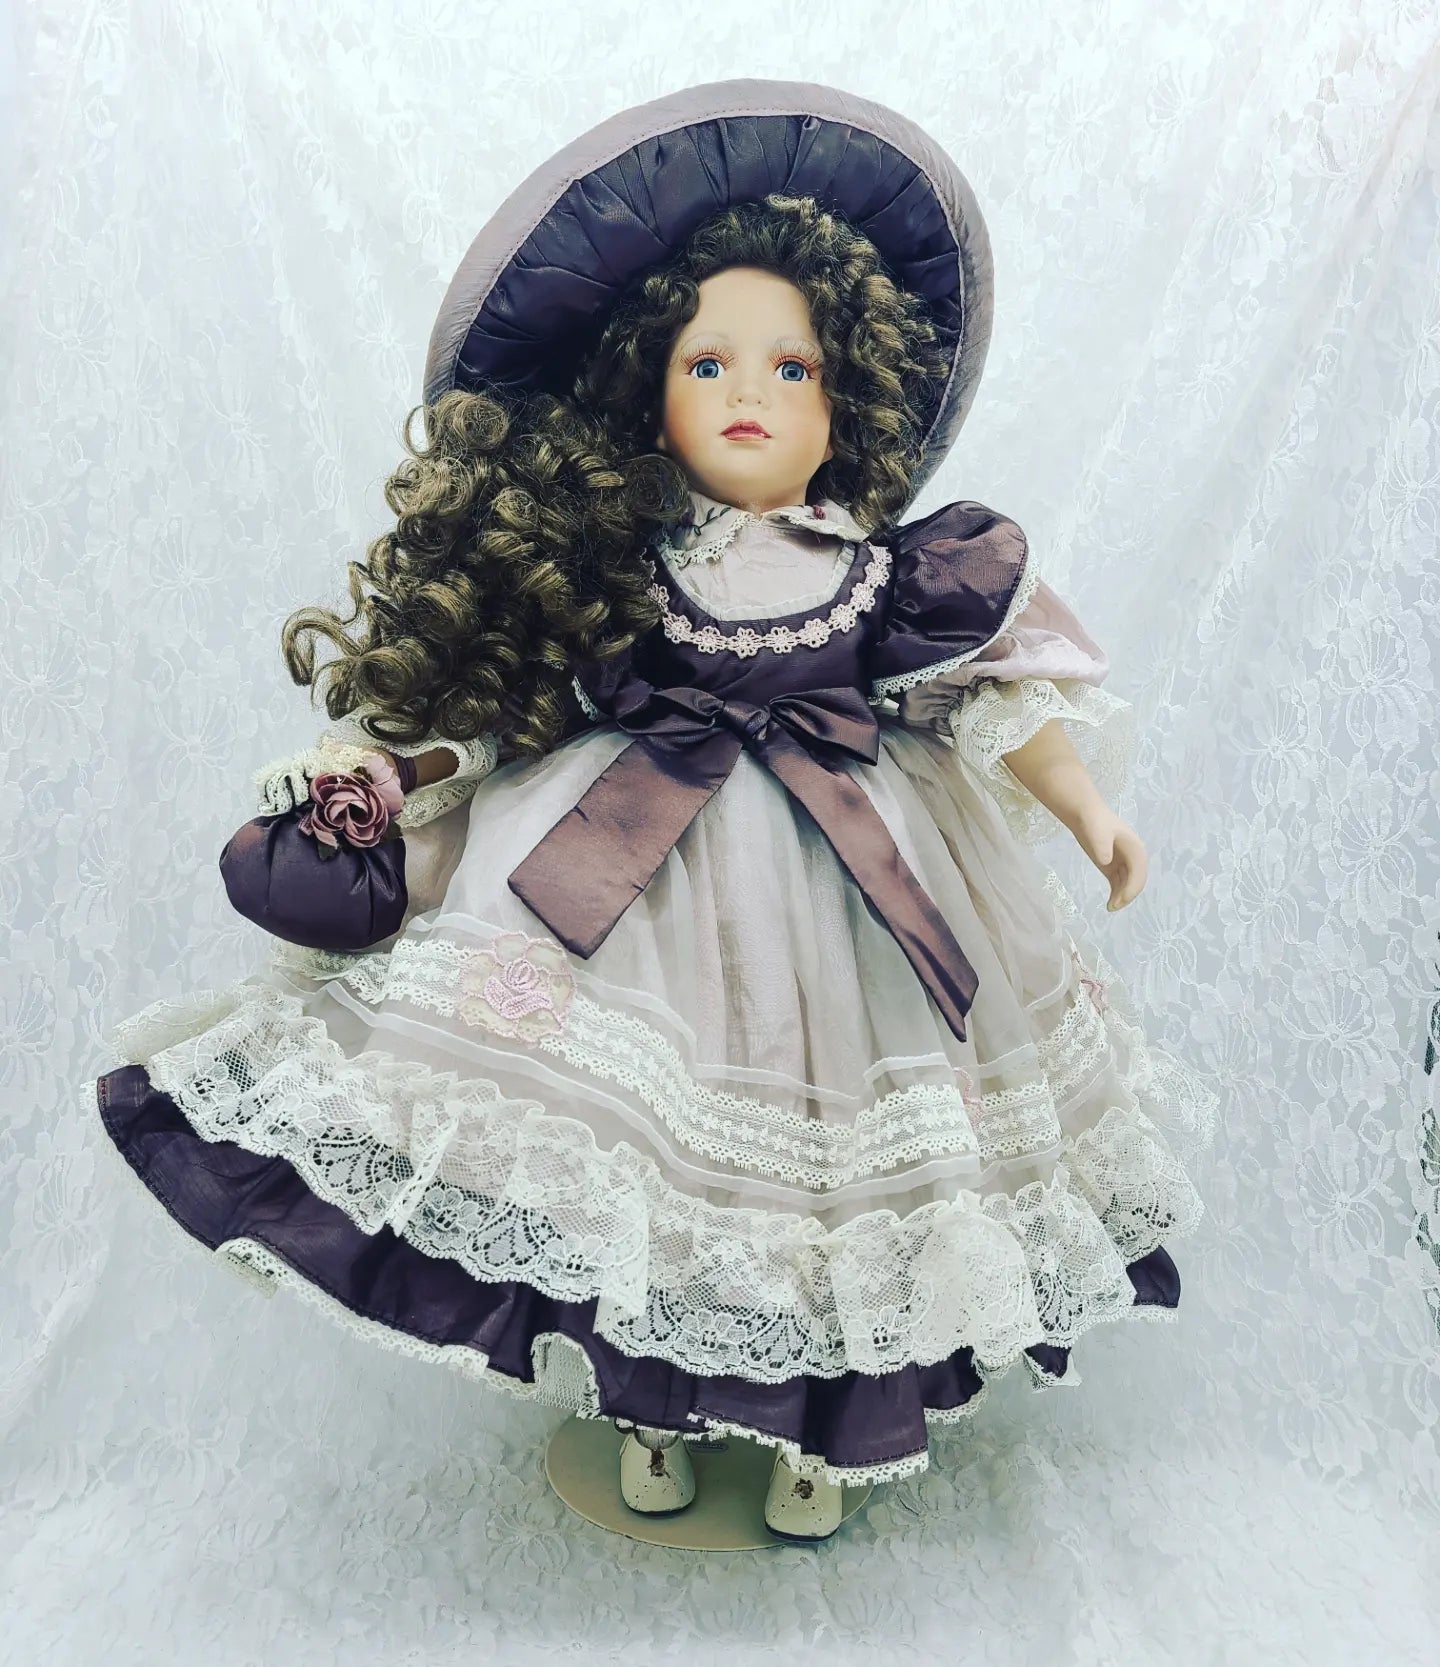 Reserved Danielle 9/8 Emmeline Haunted Doll ~ 24" BIG Fancy Heavy Porcelain Doll ~ Paranormal ~ Intuitive ~ Experience Preferred ~ Smart and Highly Communicative